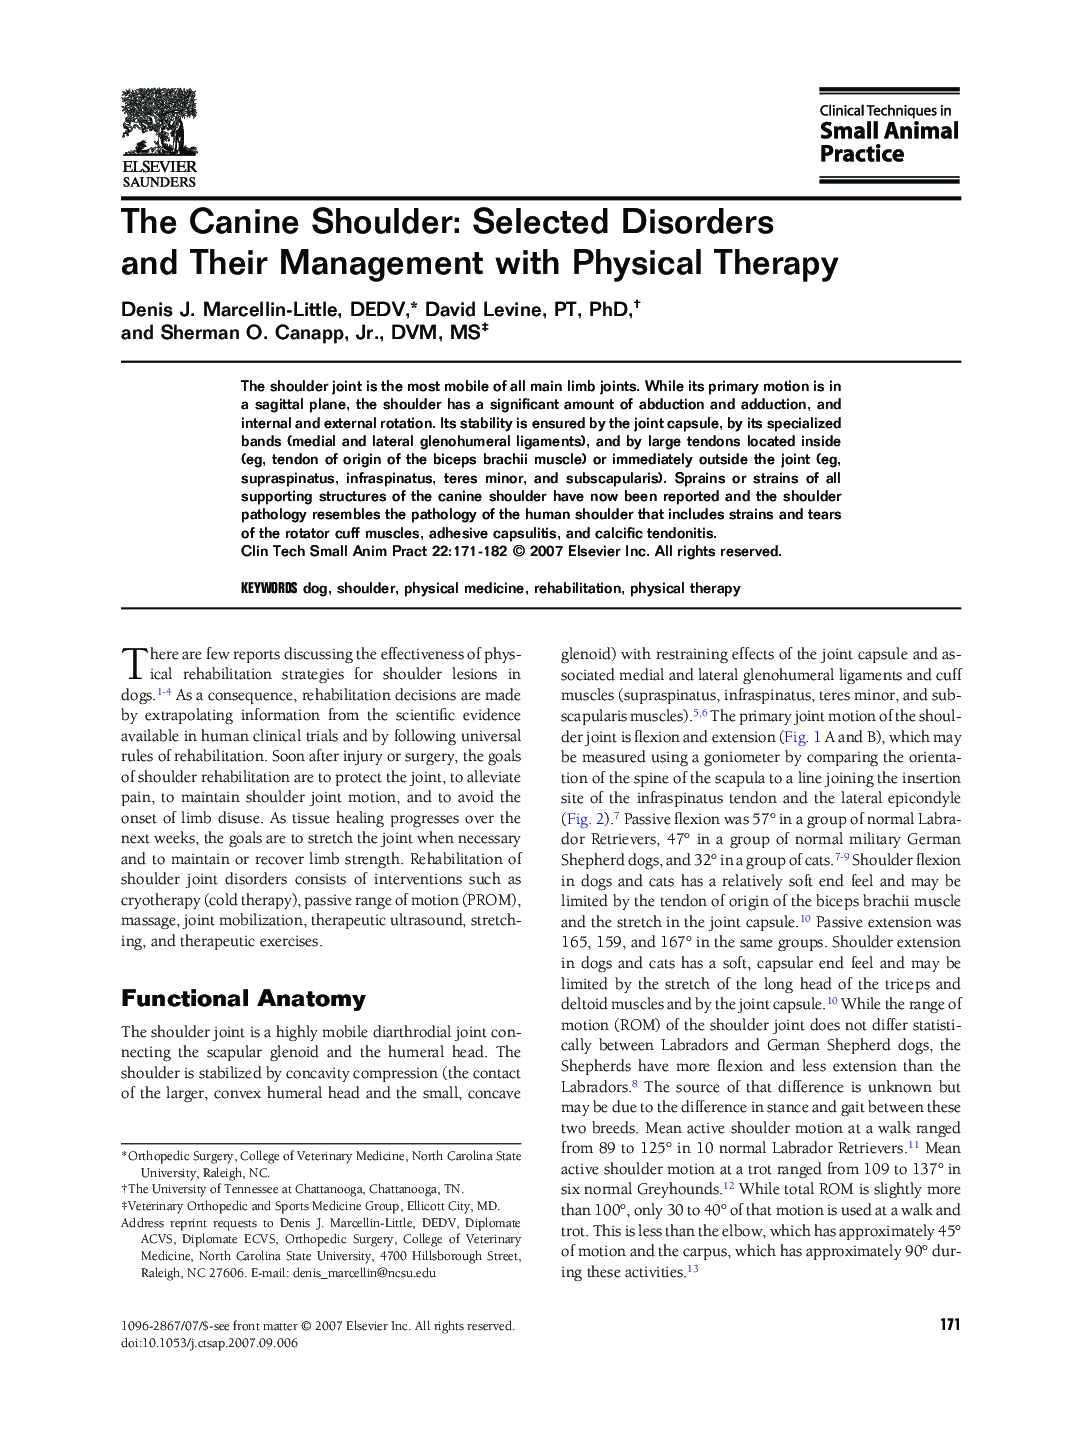 The Canine Shoulder: Selected Disorders and Their Management with Physical Therapy